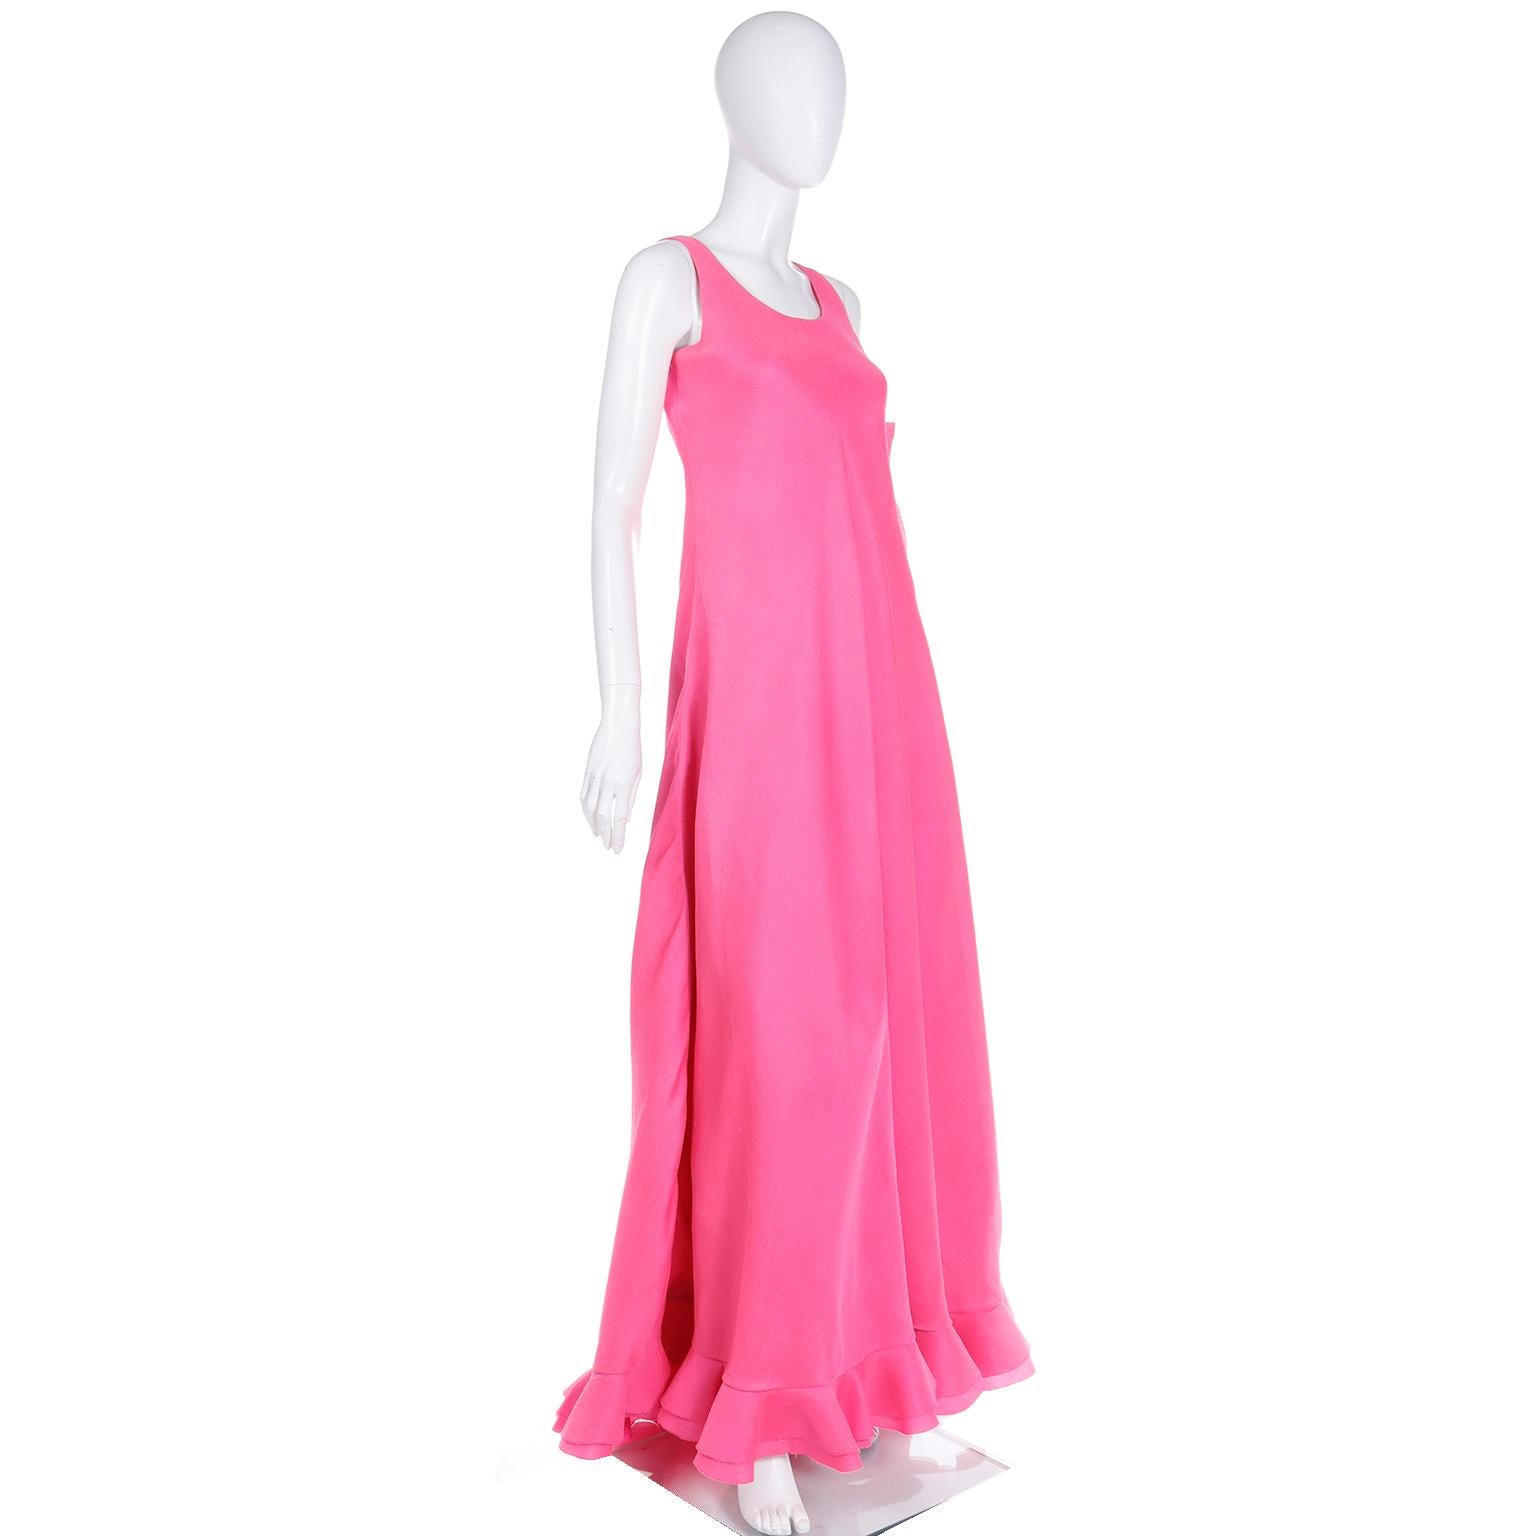 1971 Christian Dior Haute Couture Pink Ruffled Runway Evening Dress Grace Kelly  For Sale 5